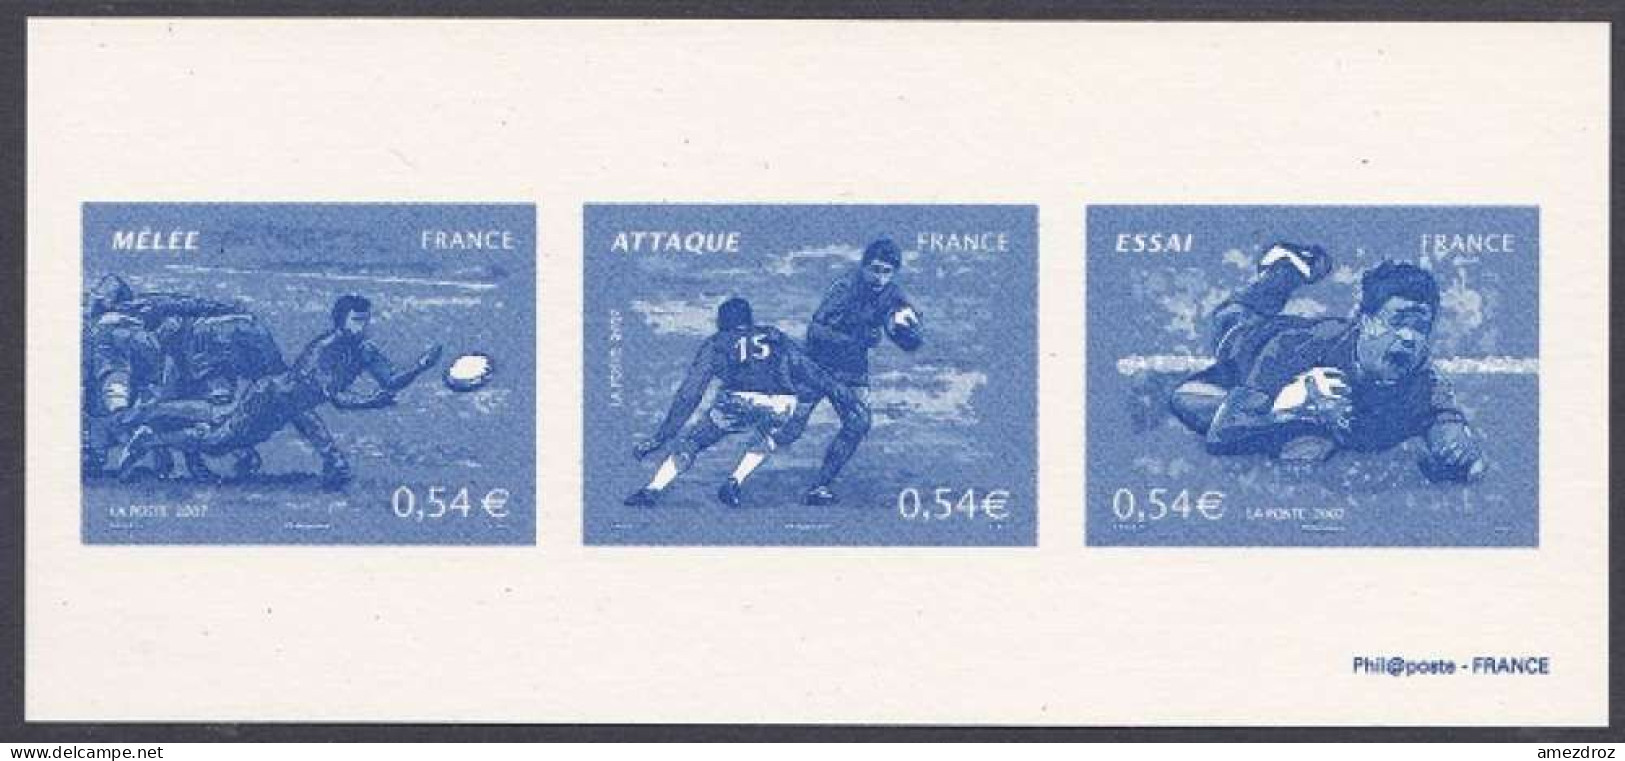 France Gravure Officielle - Rugby 2007 (4) - Documents Of Postal Services